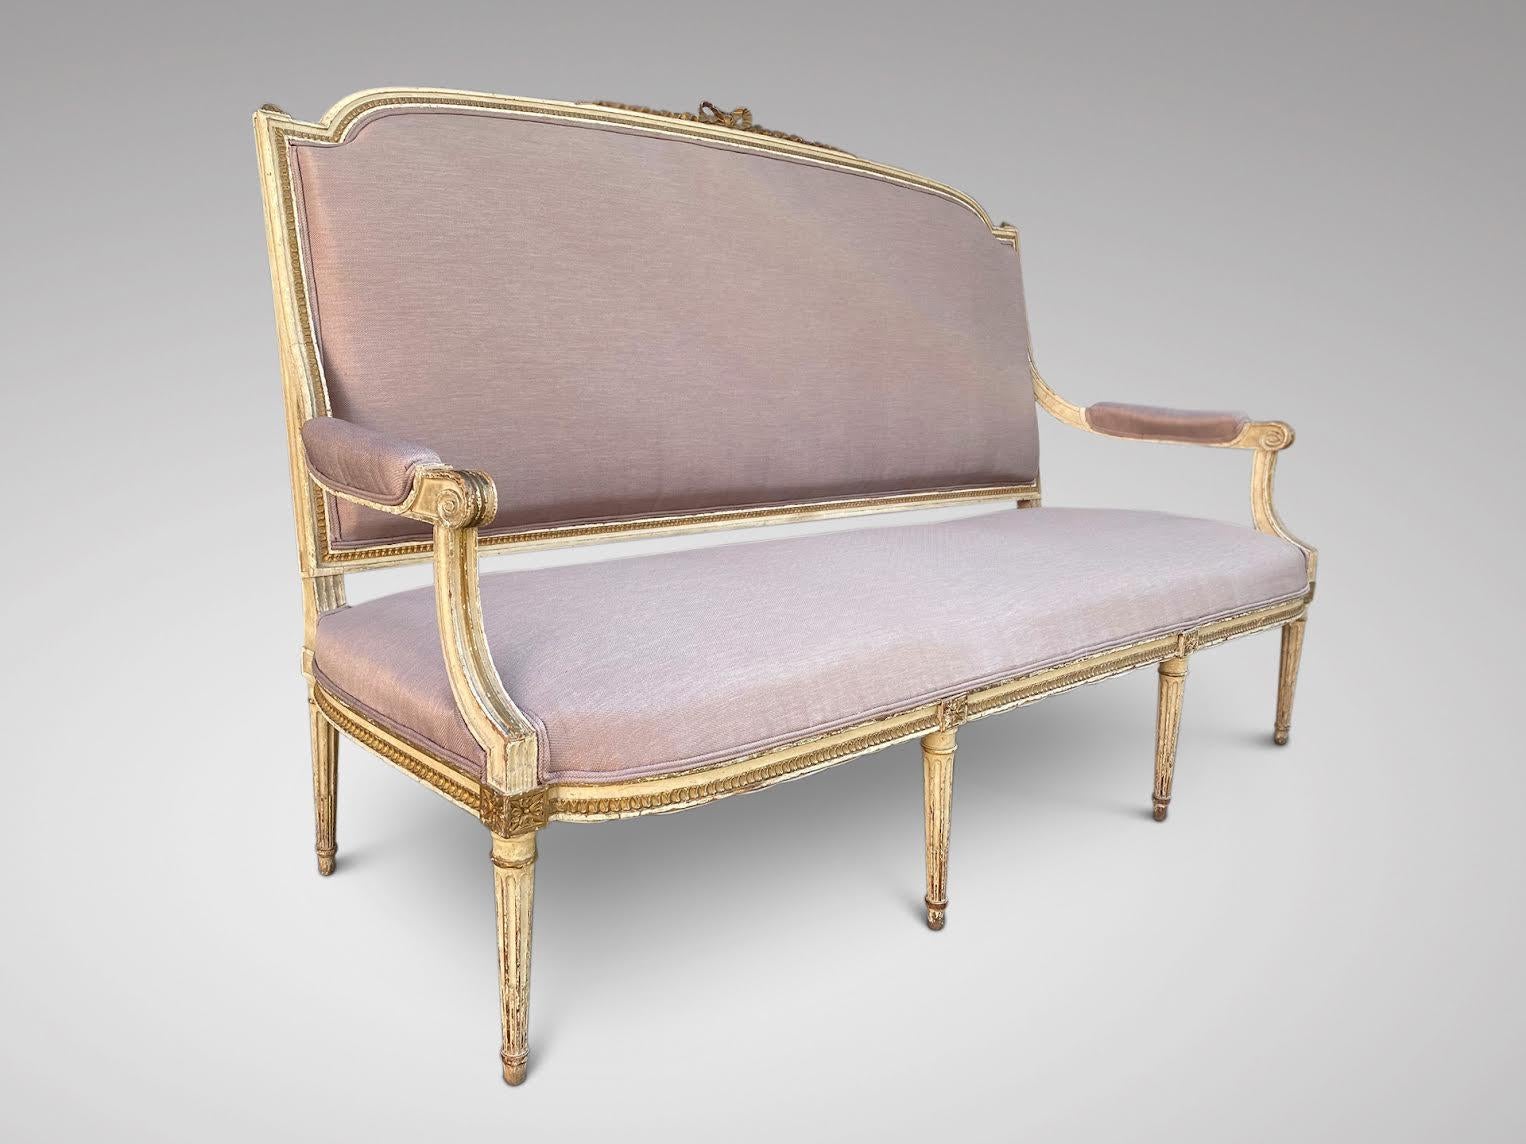 Upholstery 19th Century French Louis XVI Reupholstered Carved Sofa Settee